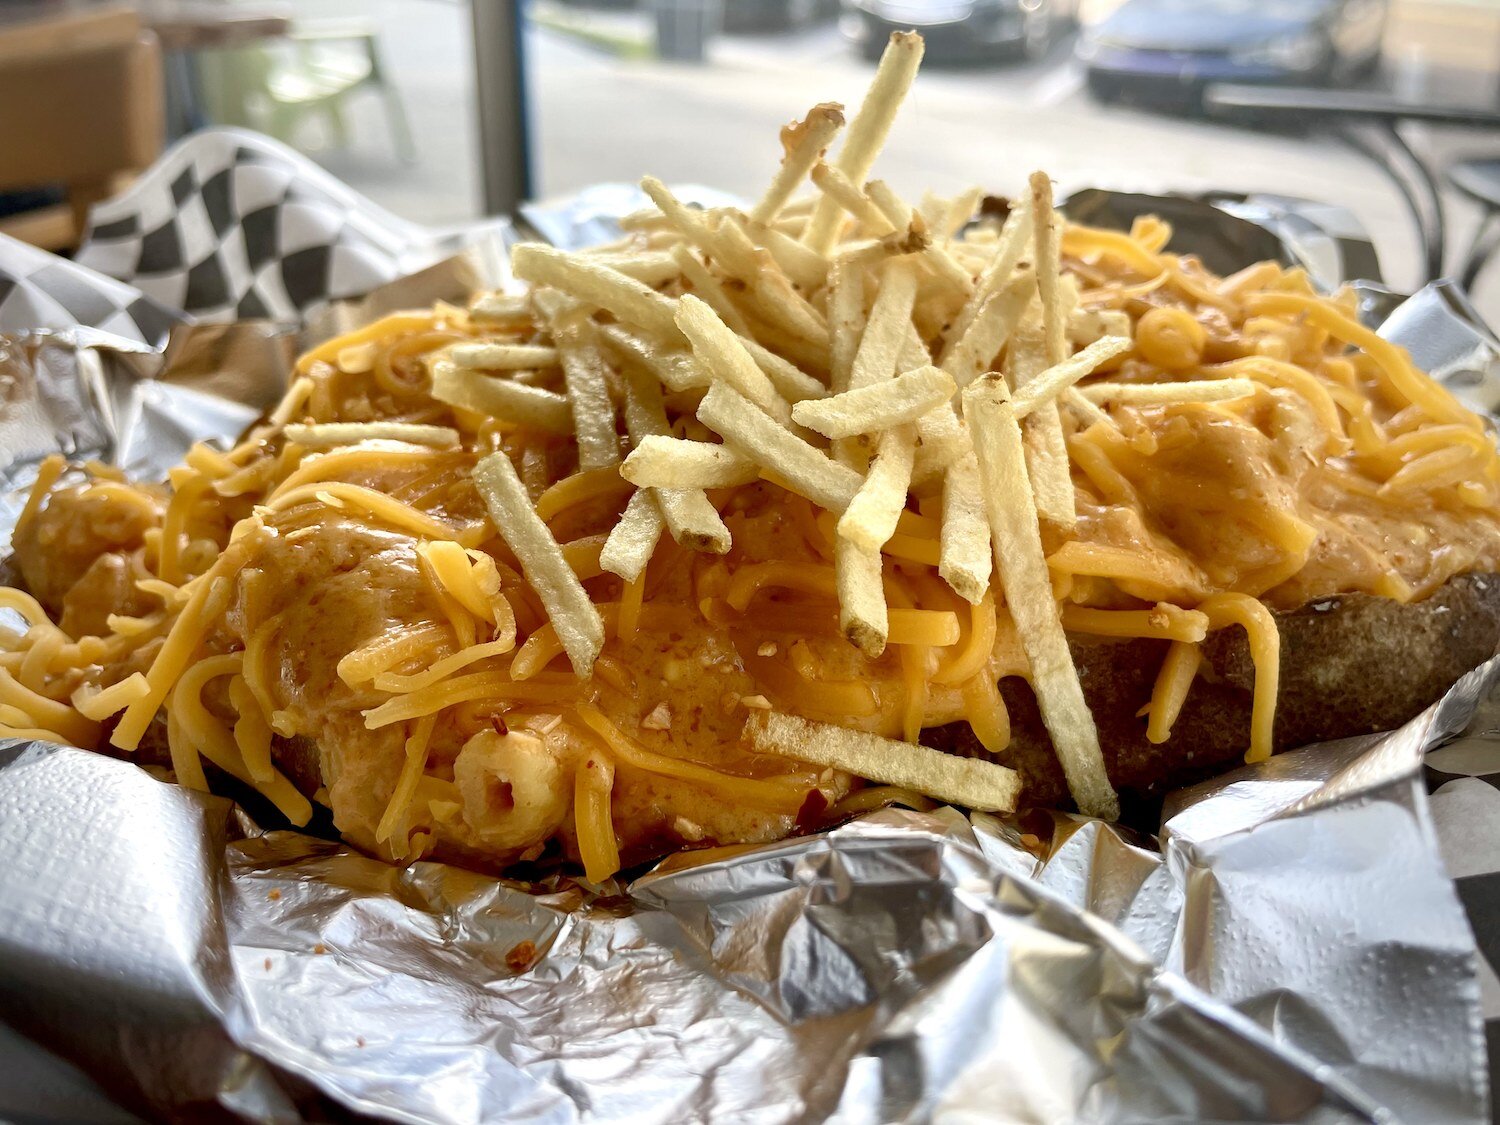 The Mac n Cheese Potato topped with home-made mac n cheese, a house cheese sauce, shredded cheddar, and potato sticks